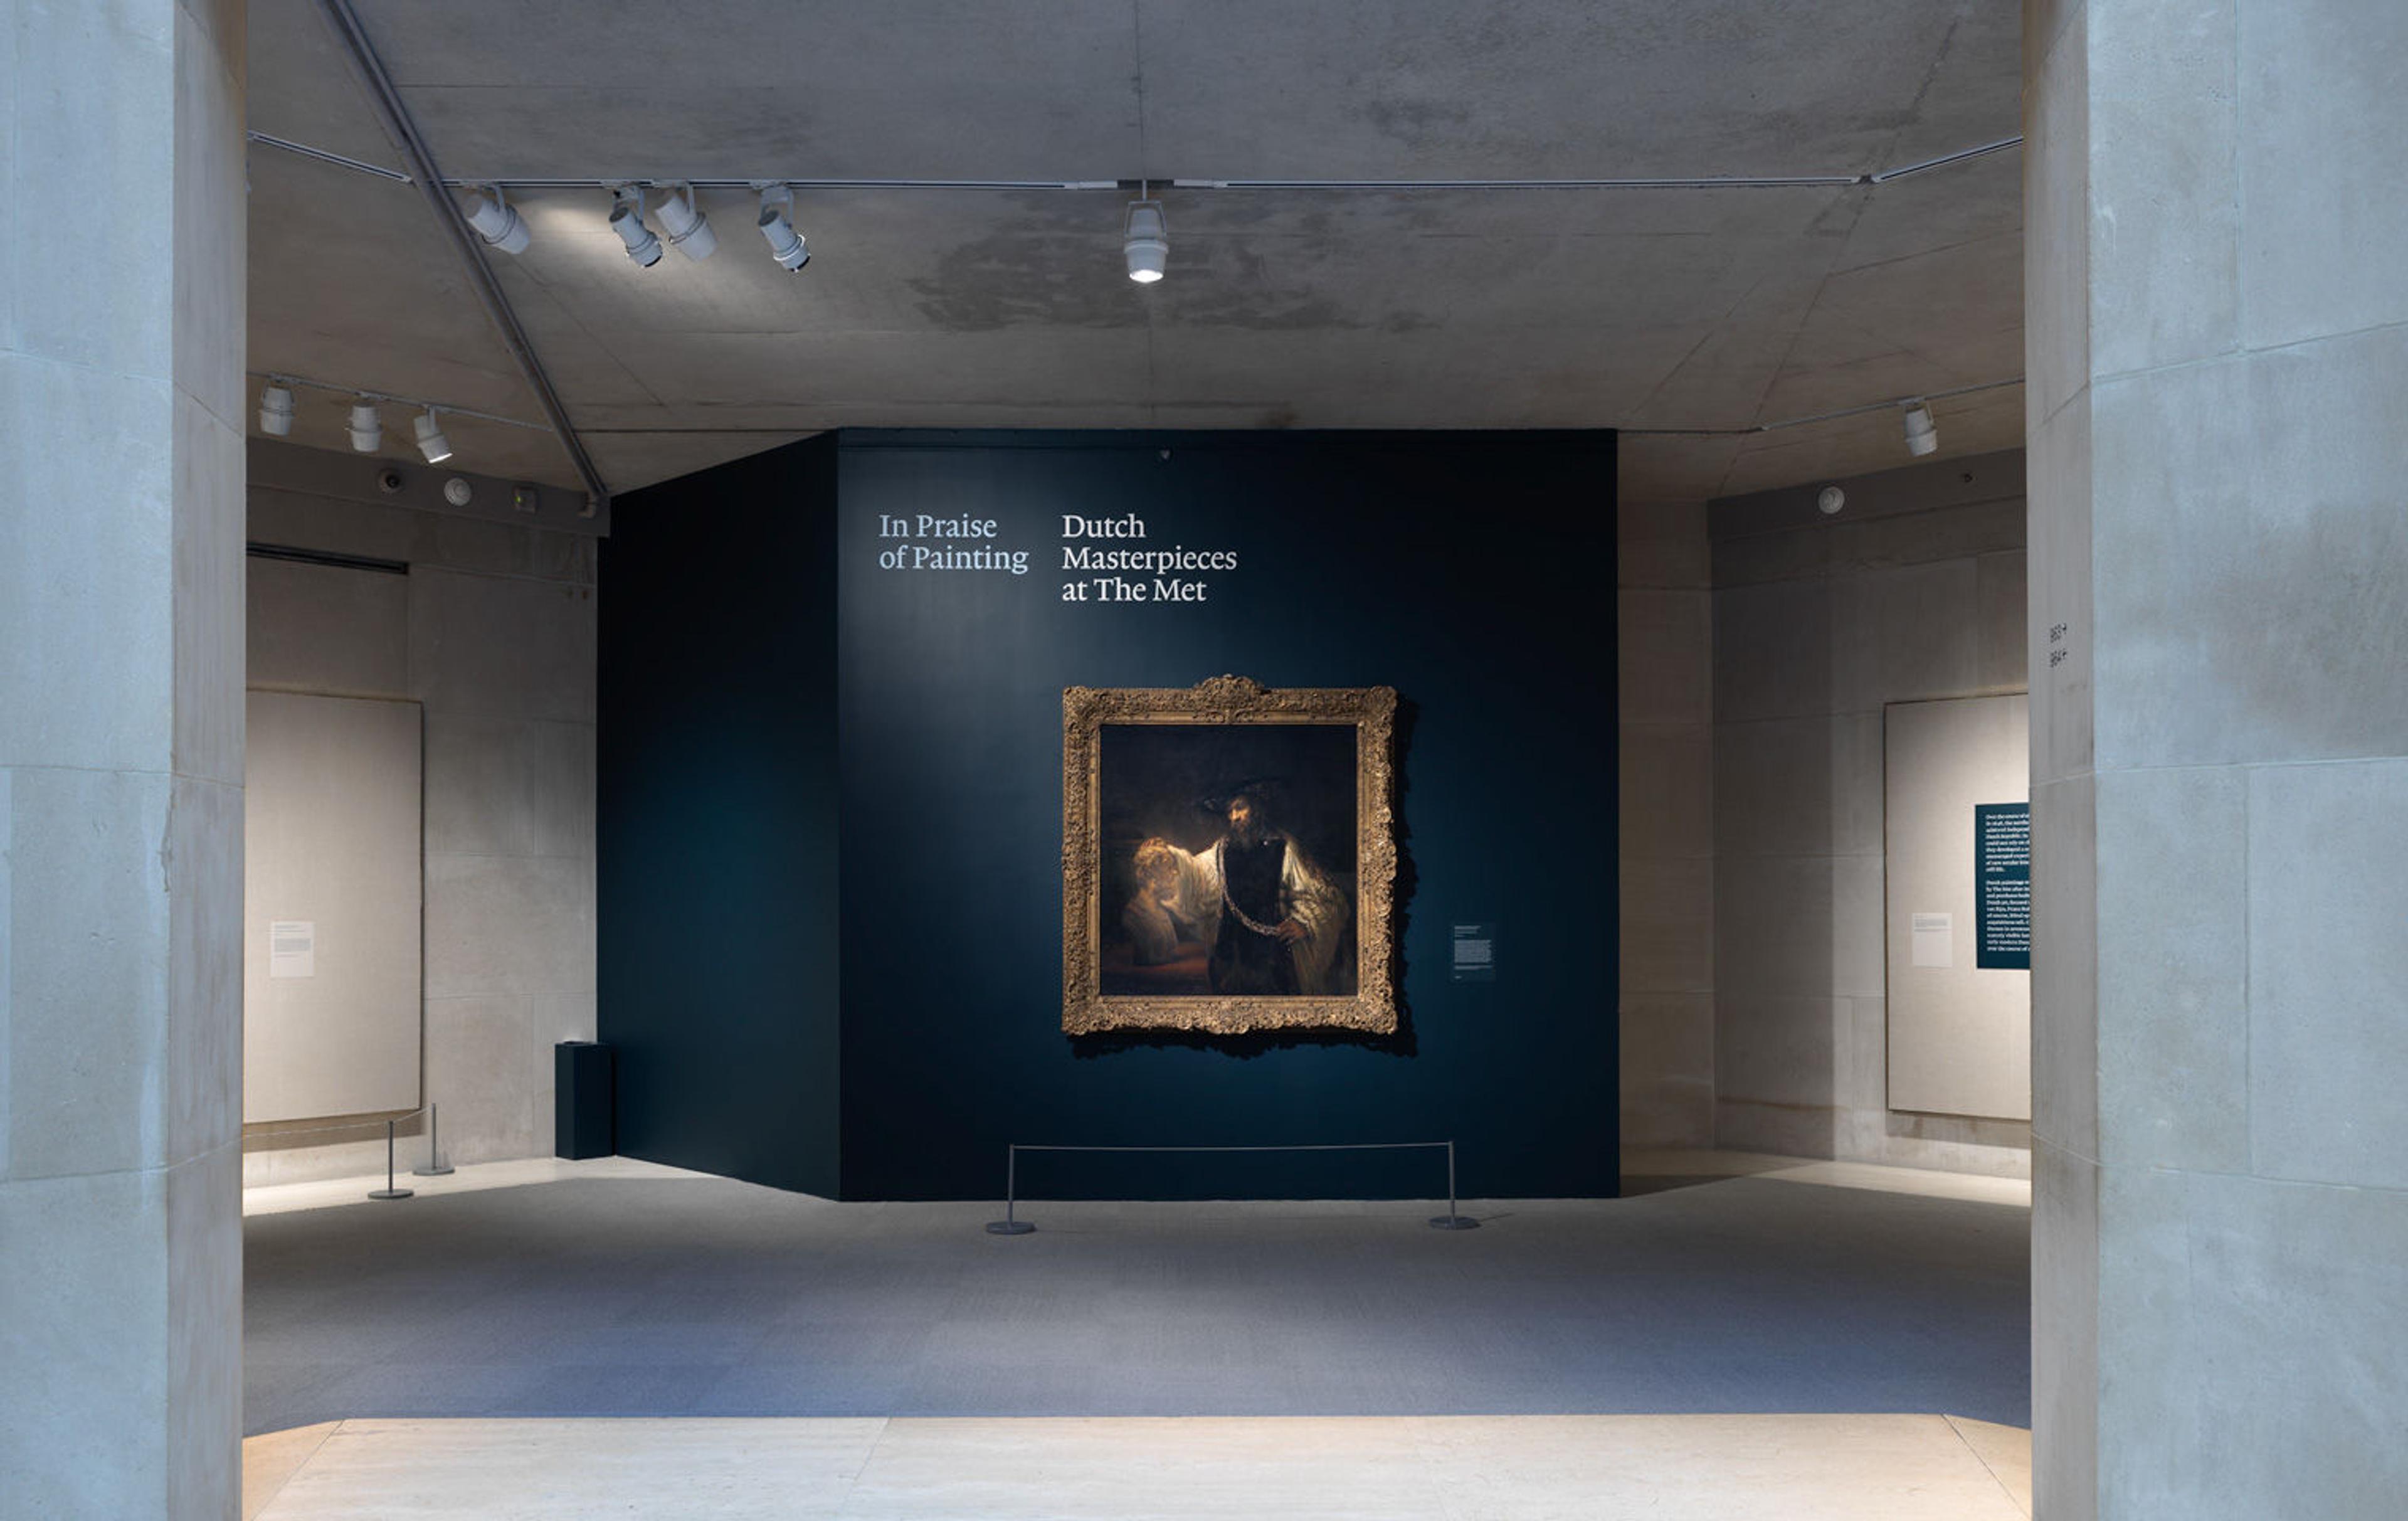 View of the entrance to the Met exhibition "In Praise of Painting: Dutch Masterpieces at The Met," where Rembrandt's "Aristotle with a Bust of Homer" is displayed